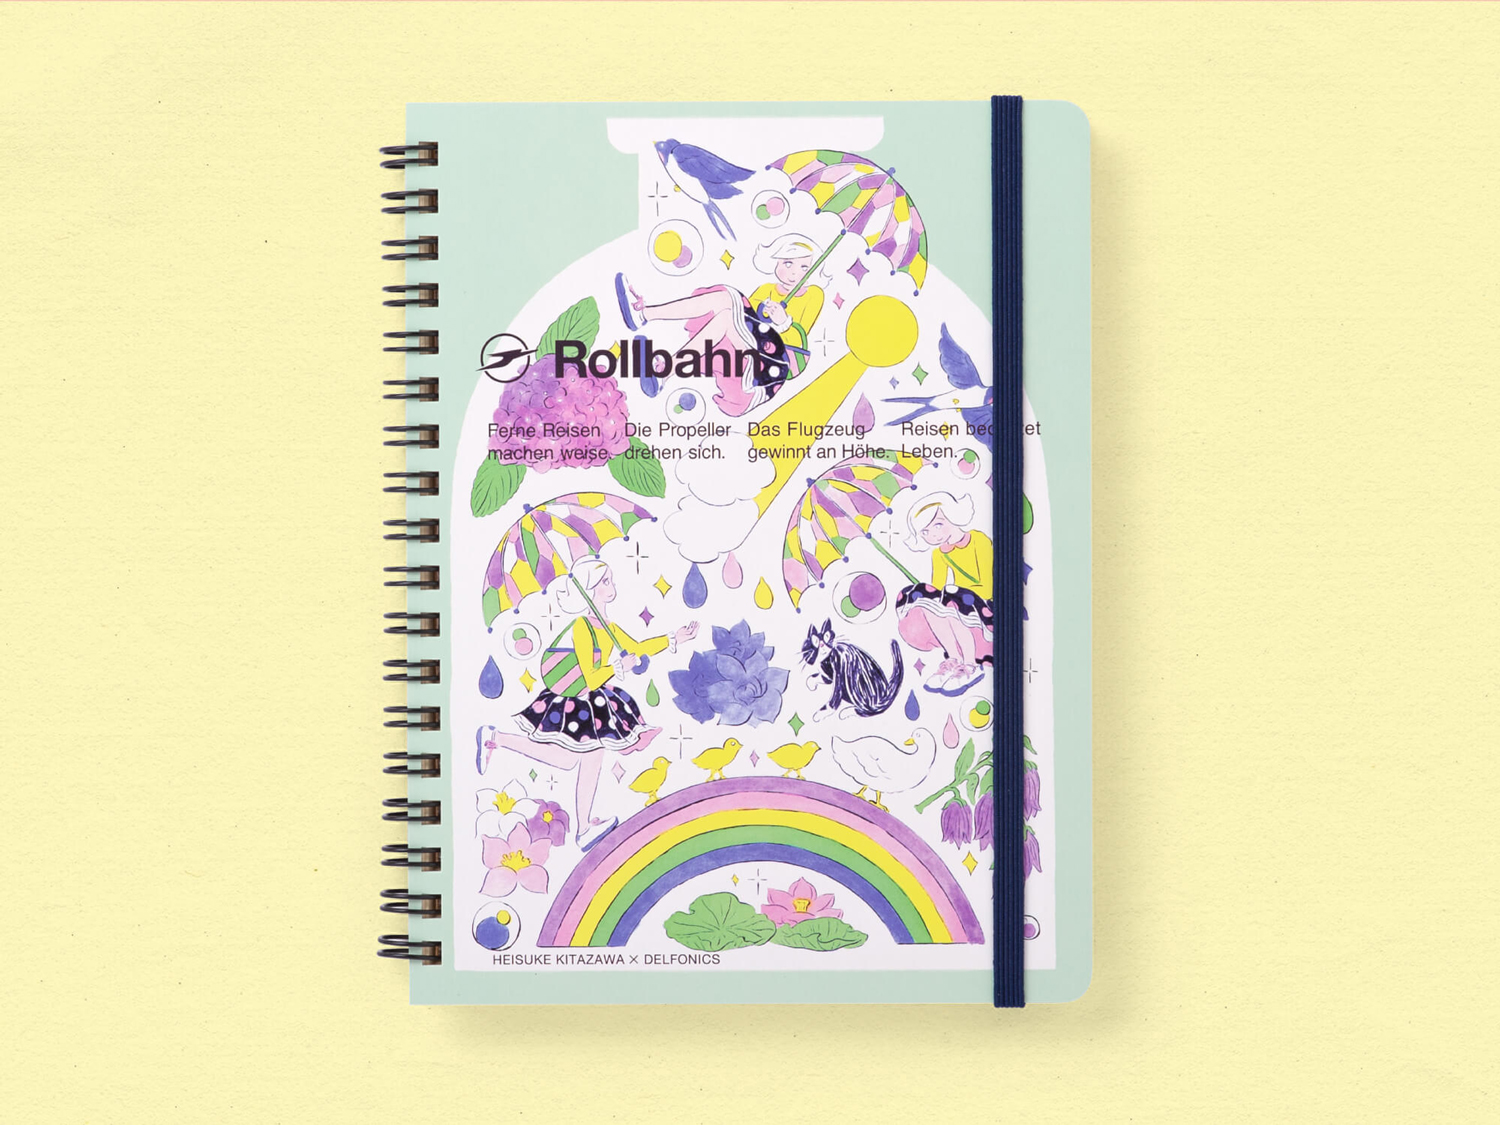 My Favorite Things - Rollbahn by 10 Artists 北澤平祐